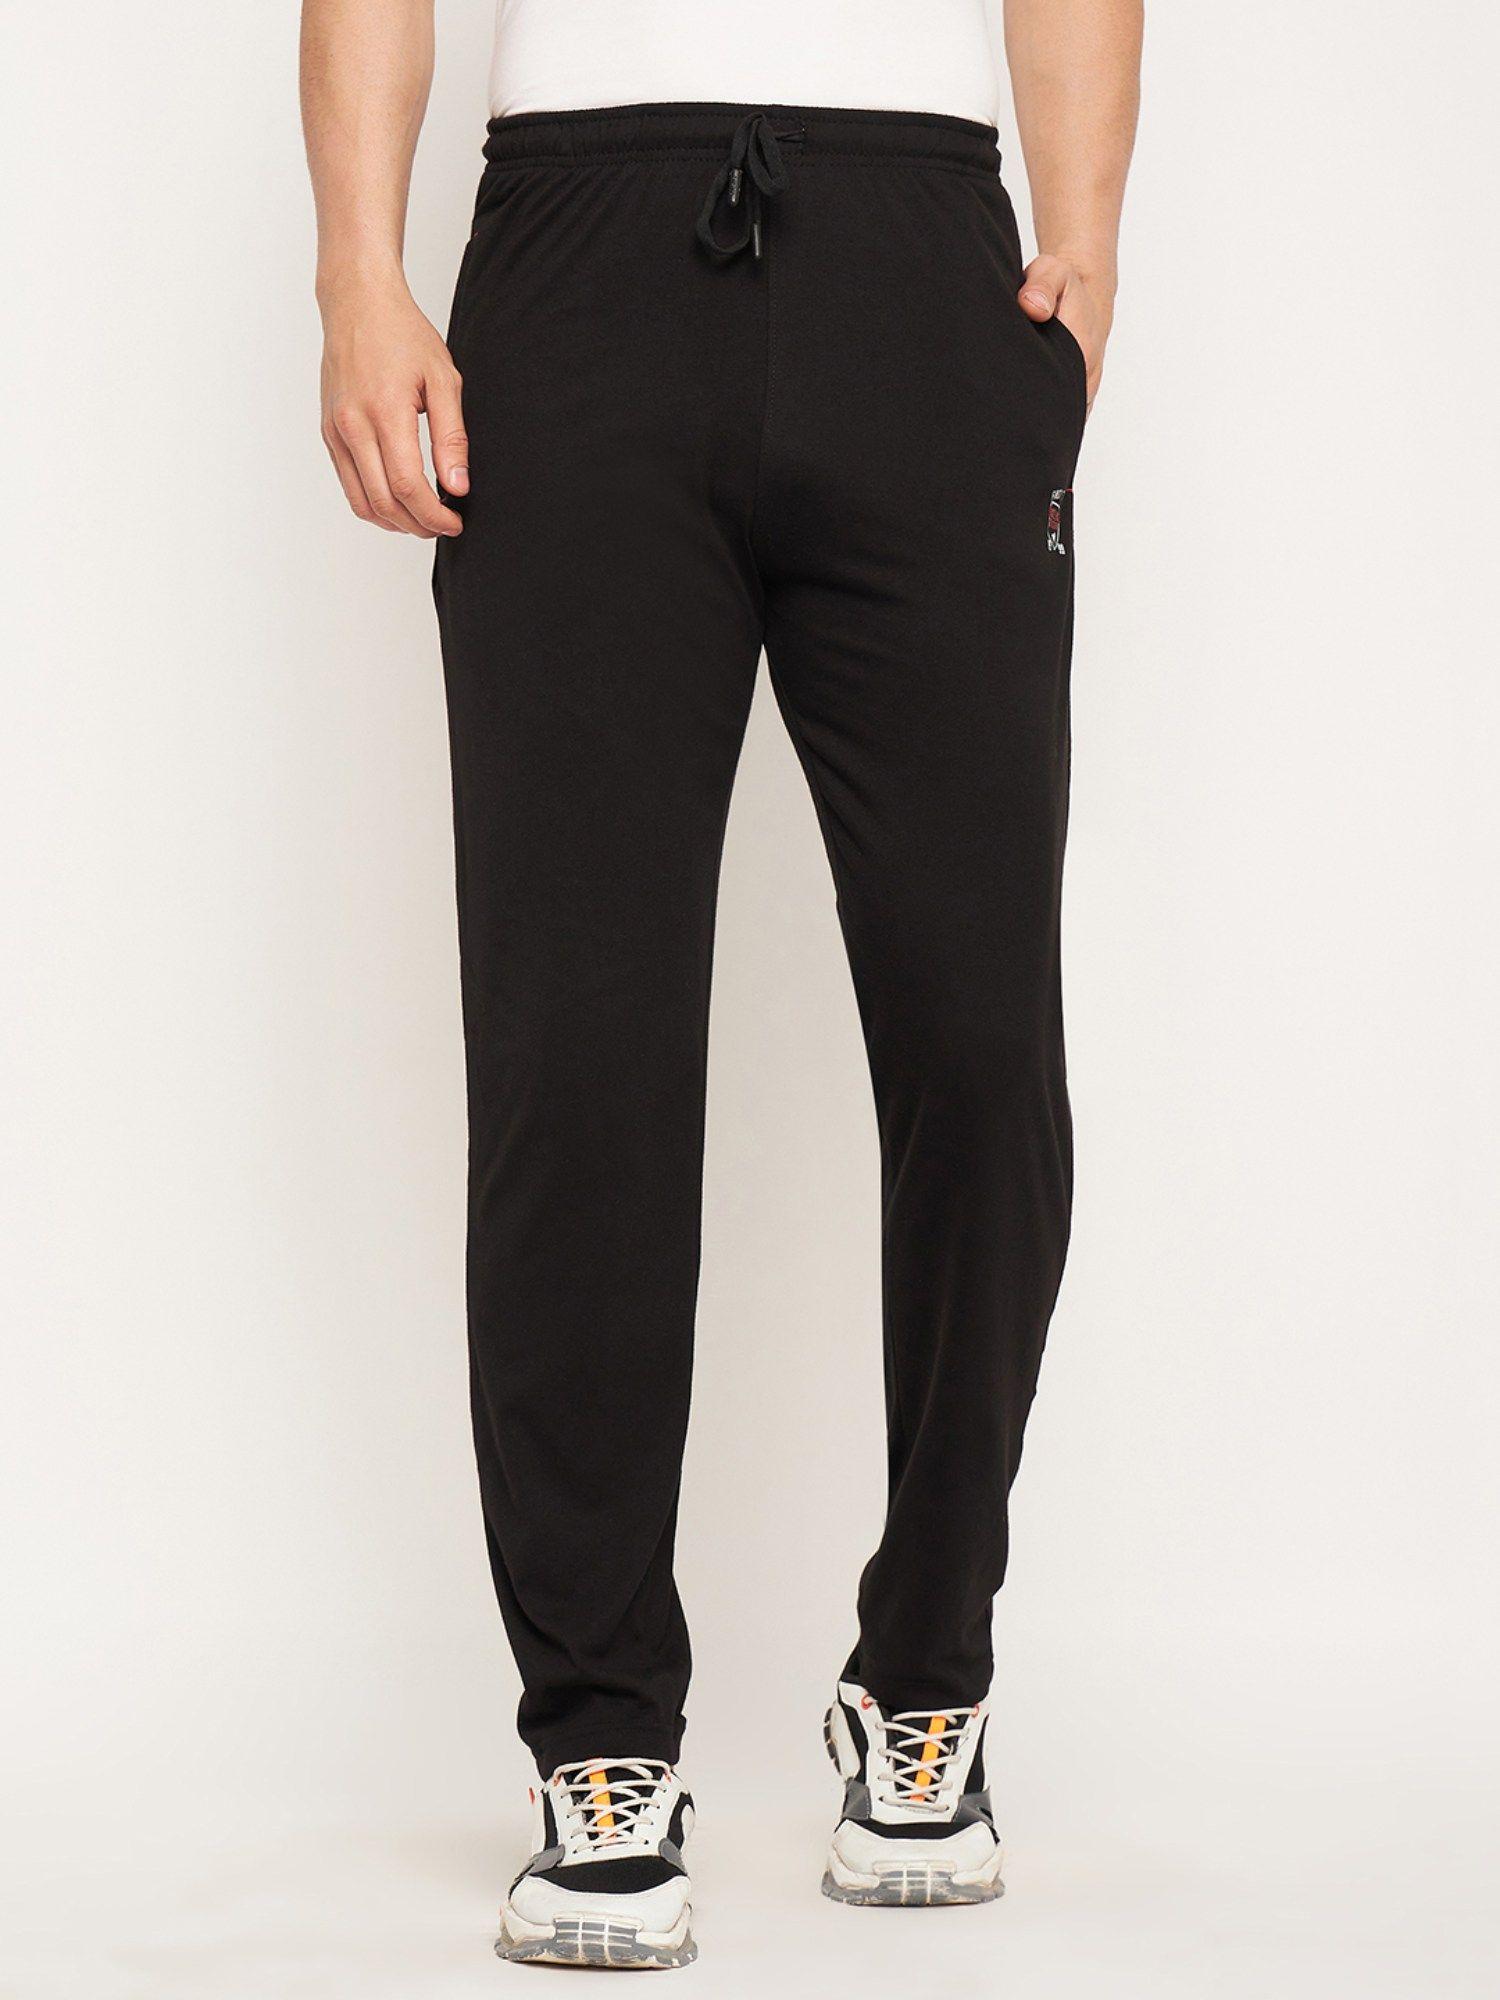 black elasticated waistband with drawstring regular fit mens trackpant